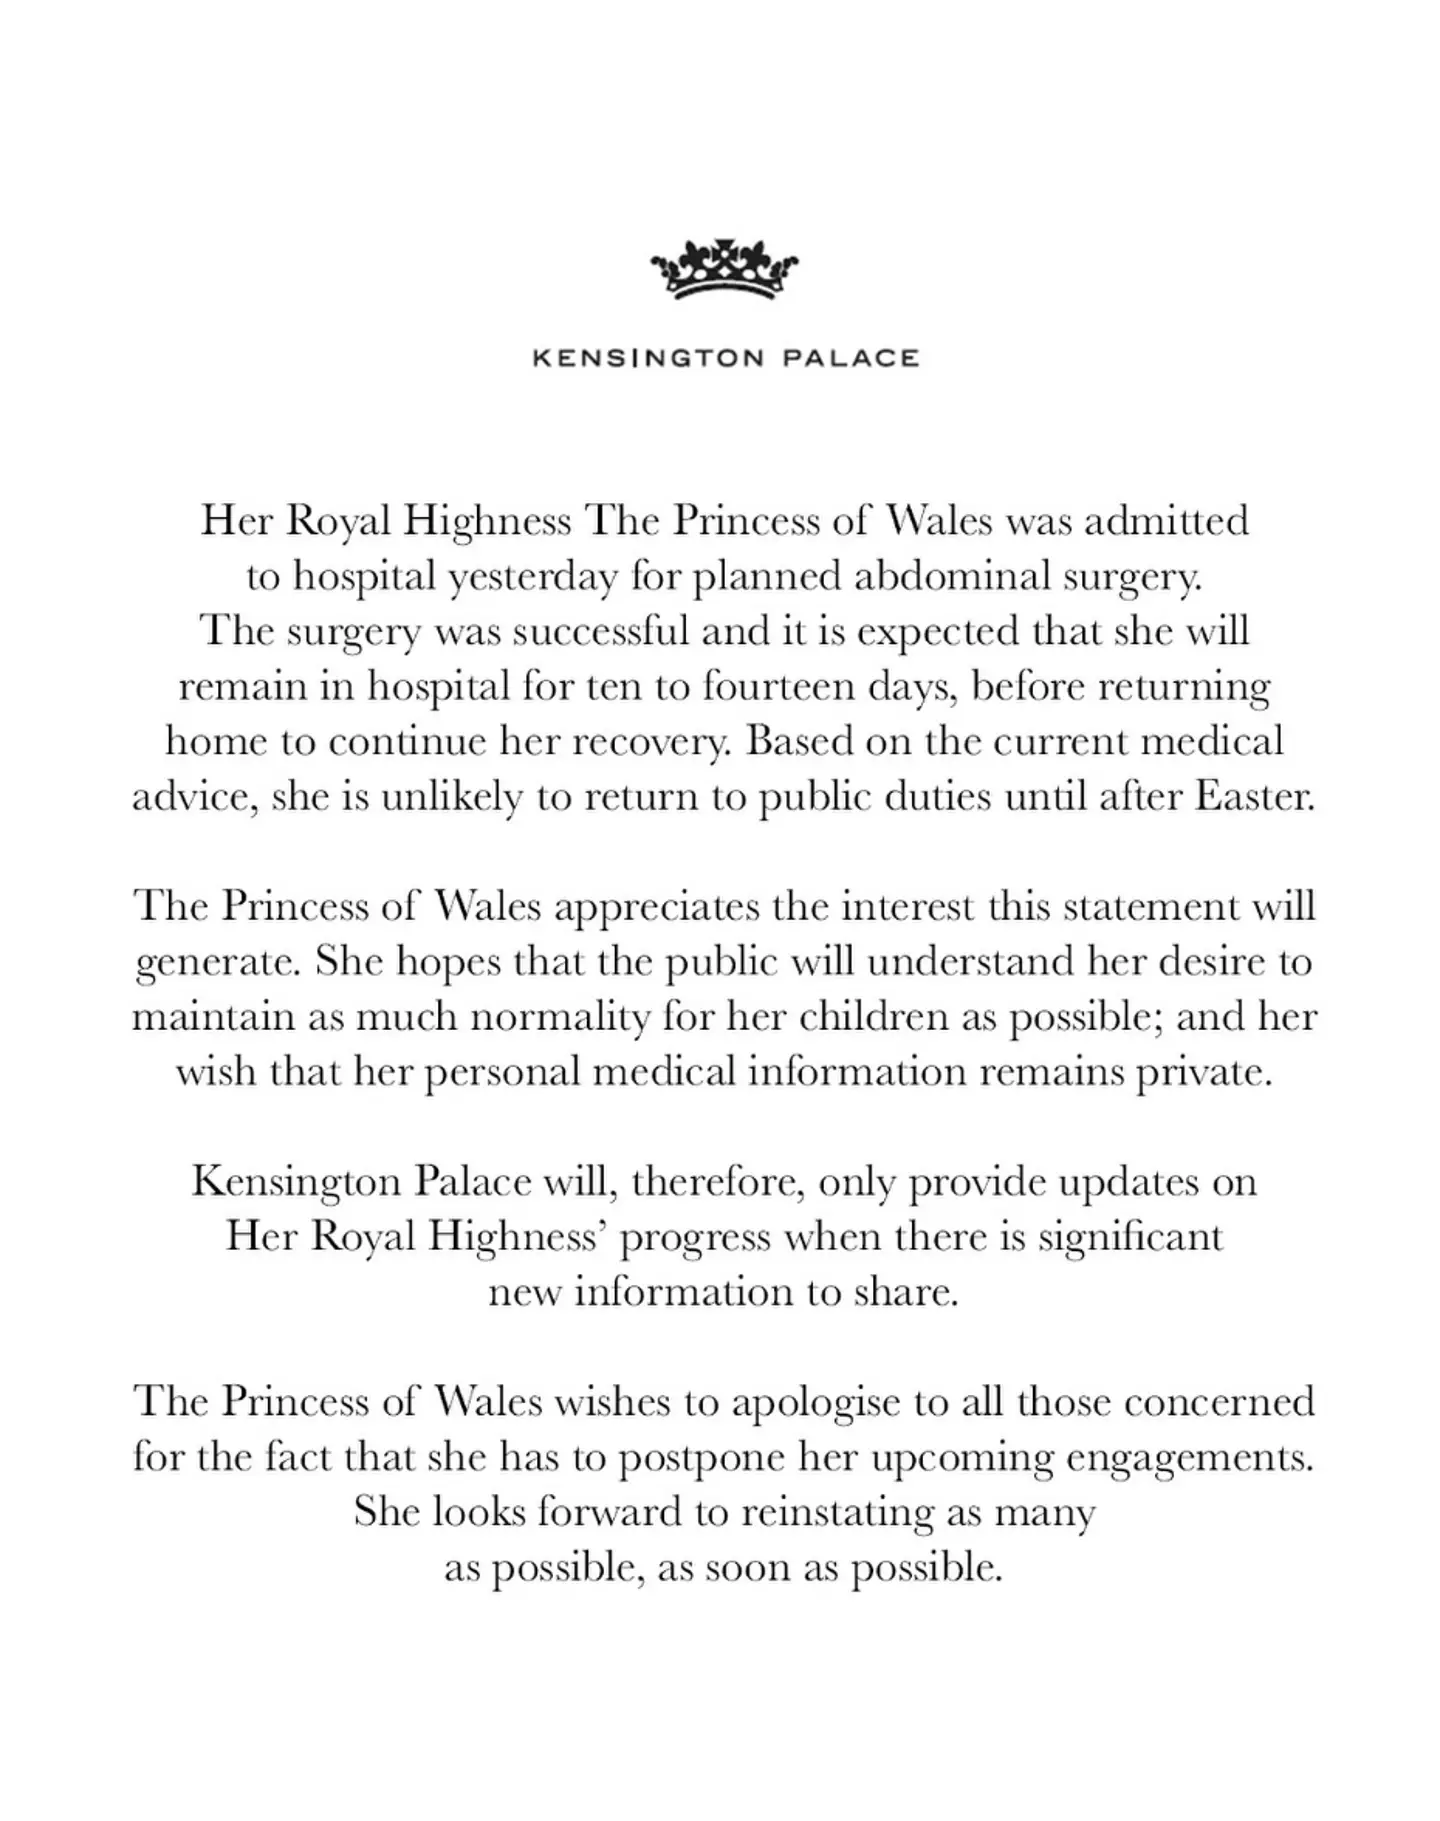 Kensington Palace released this statement on Instagram.